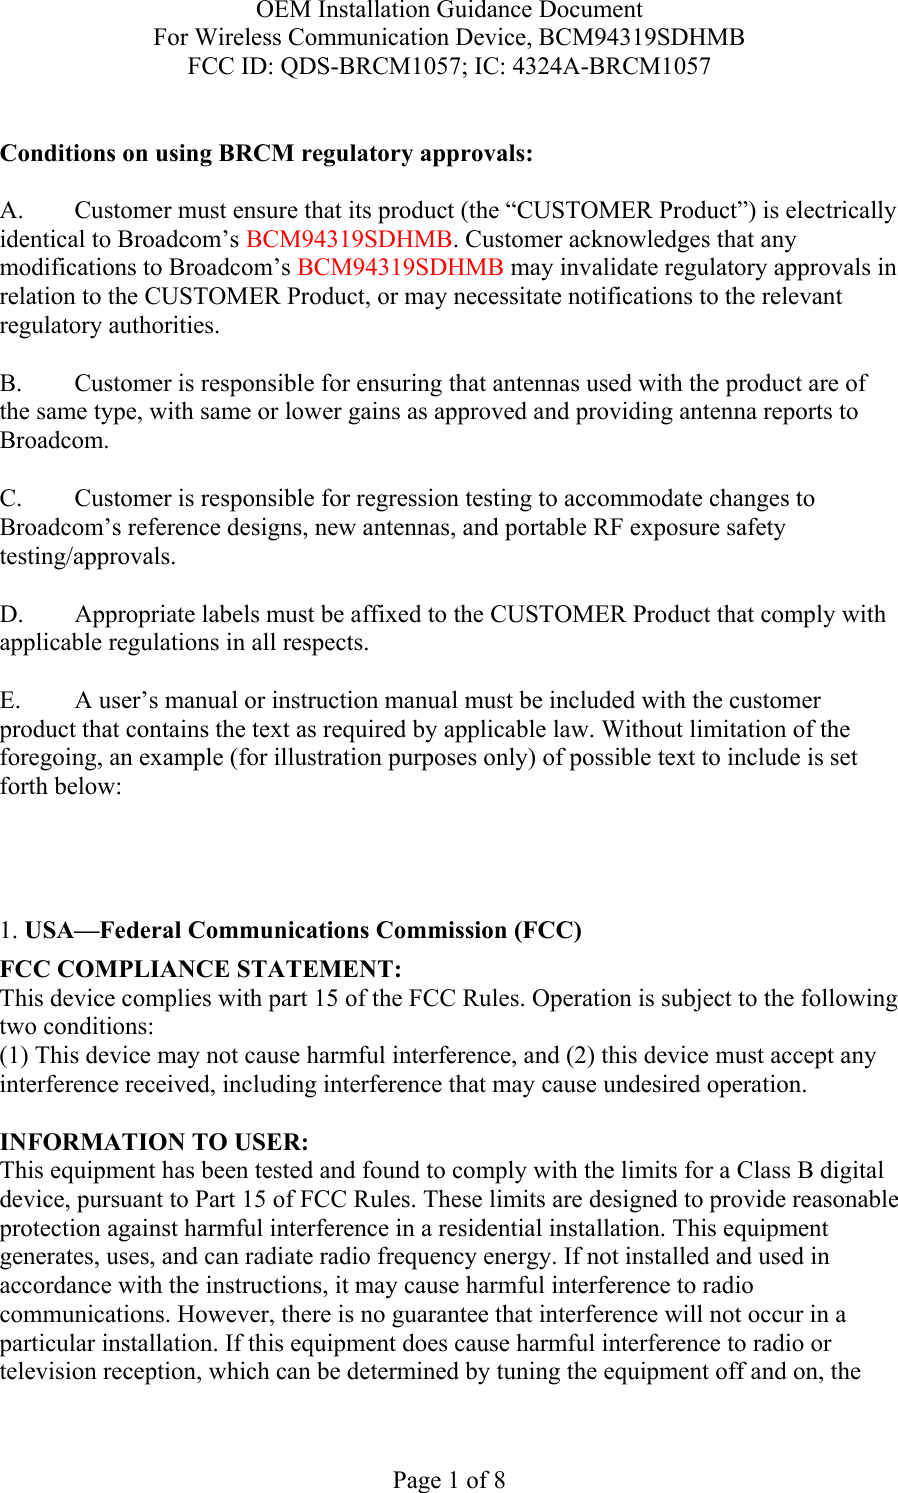 OEM Installation Guidance Document For Wireless Communication Device, BCM94319SDHMB FCC ID: QDS-BRCM1057; IC: 4324A-BRCM1057  Page 1 of 8  Conditions on using BRCM regulatory approvals:   A.  Customer must ensure that its product (the “CUSTOMER Product”) is electrically identical to Broadcom’s BCM94319SDHMB. Customer acknowledges that any modifications to Broadcom’s BCM94319SDHMB may invalidate regulatory approvals in relation to the CUSTOMER Product, or may necessitate notifications to the relevant regulatory authorities.  B.   Customer is responsible for ensuring that antennas used with the product are of the same type, with same or lower gains as approved and providing antenna reports to Broadcom.  C.   Customer is responsible for regression testing to accommodate changes to Broadcom’s reference designs, new antennas, and portable RF exposure safety testing/approvals.  D.  Appropriate labels must be affixed to the CUSTOMER Product that comply with applicable regulations in all respects.    E.  A user’s manual or instruction manual must be included with the customer product that contains the text as required by applicable law. Without limitation of the foregoing, an example (for illustration purposes only) of possible text to include is set forth below:      1. USA—Federal Communications Commission (FCC) FCC COMPLIANCE STATEMENT: This device complies with part 15 of the FCC Rules. Operation is subject to the following two conditions: (1) This device may not cause harmful interference, and (2) this device must accept any interference received, including interference that may cause undesired operation.  INFORMATION TO USER: This equipment has been tested and found to comply with the limits for a Class B digital device, pursuant to Part 15 of FCC Rules. These limits are designed to provide reasonable protection against harmful interference in a residential installation. This equipment generates, uses, and can radiate radio frequency energy. If not installed and used in accordance with the instructions, it may cause harmful interference to radio communications. However, there is no guarantee that interference will not occur in a particular installation. If this equipment does cause harmful interference to radio or television reception, which can be determined by tuning the equipment off and on, the 